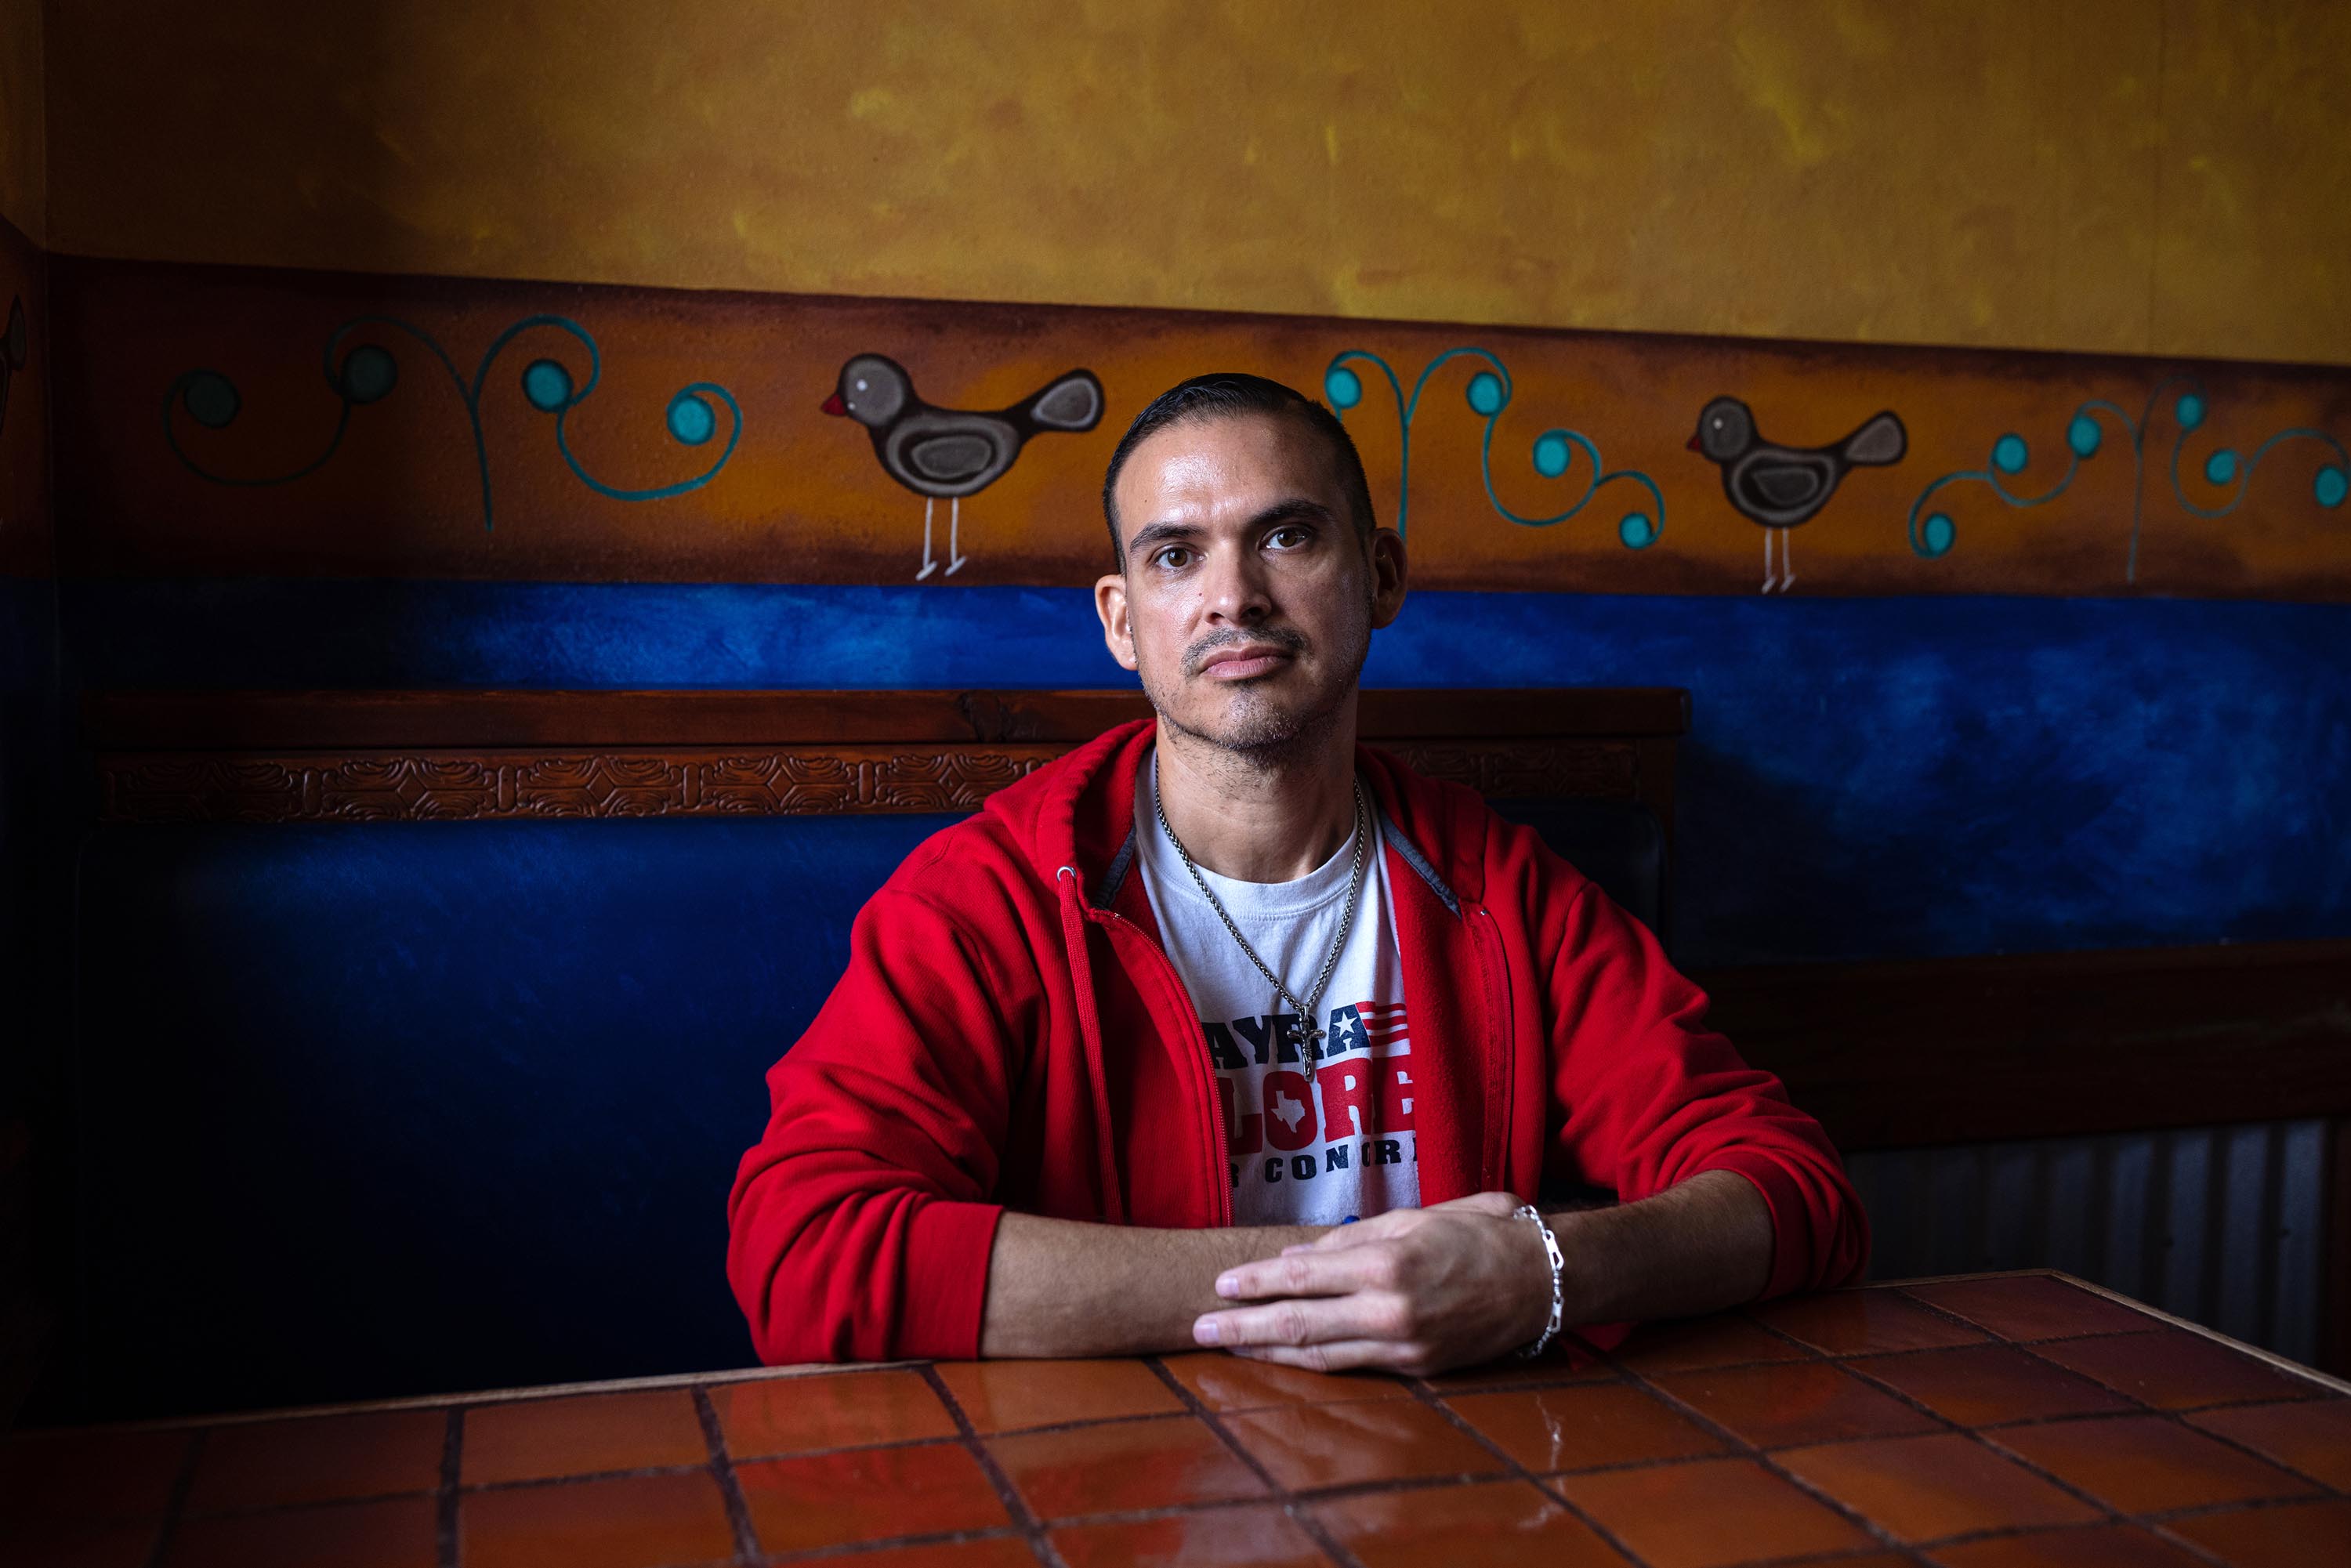 Eddie Gonzales, a volunteer campaigning for Mayra Flores, Republican candidate for Texas' 34th Congressional District, sits for a portrait at El Pato Mexican Food, the location of a blockwalk kick-off event, in Brownsville, Texas, on February 19, 2022.